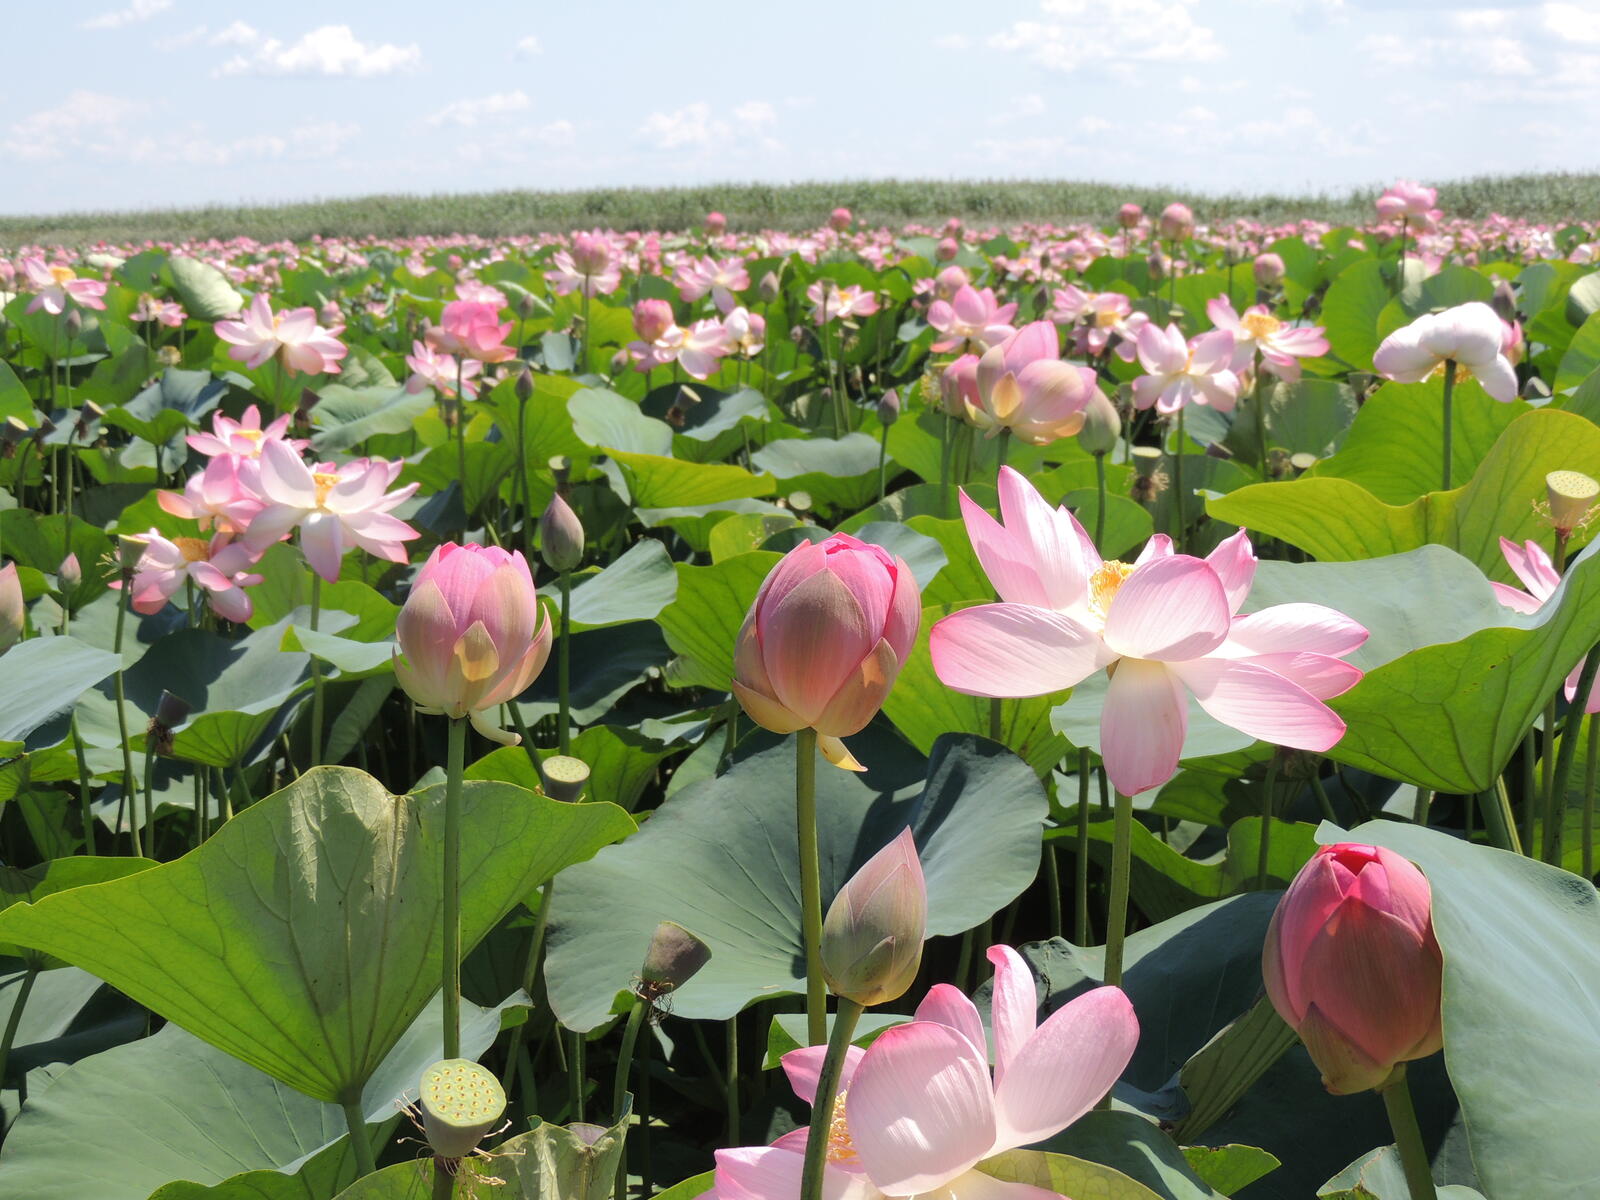 Free photo A large field with pink lotuses